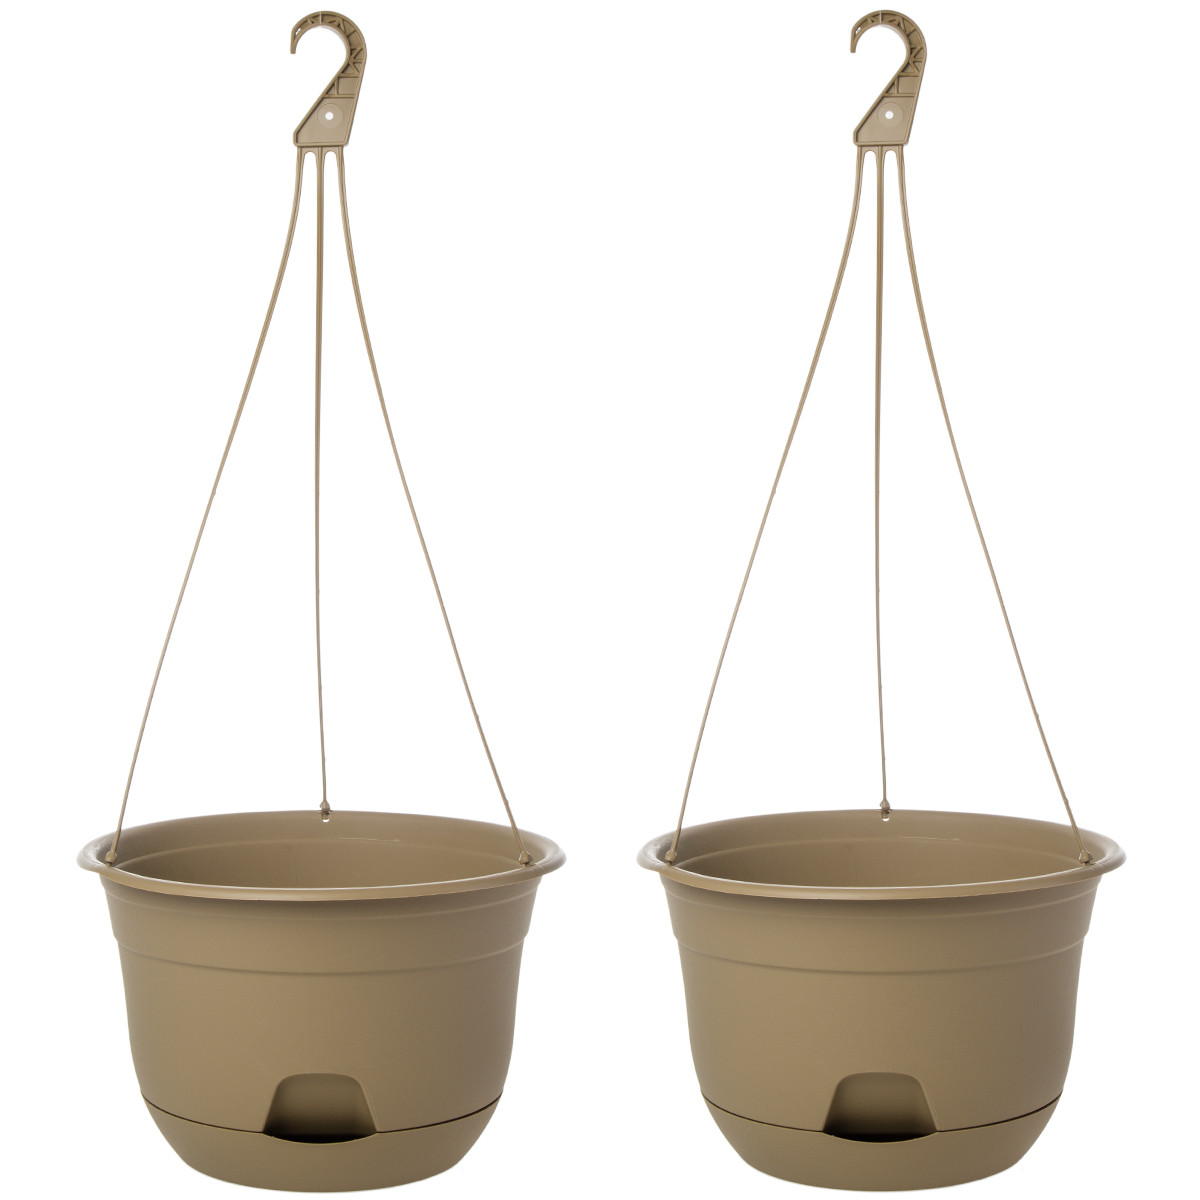 Best ideas about Indoor Hanging Planter
. Save or Pin 2pk Suncast 12” Self Watering Hanging Planter Indoor Now.